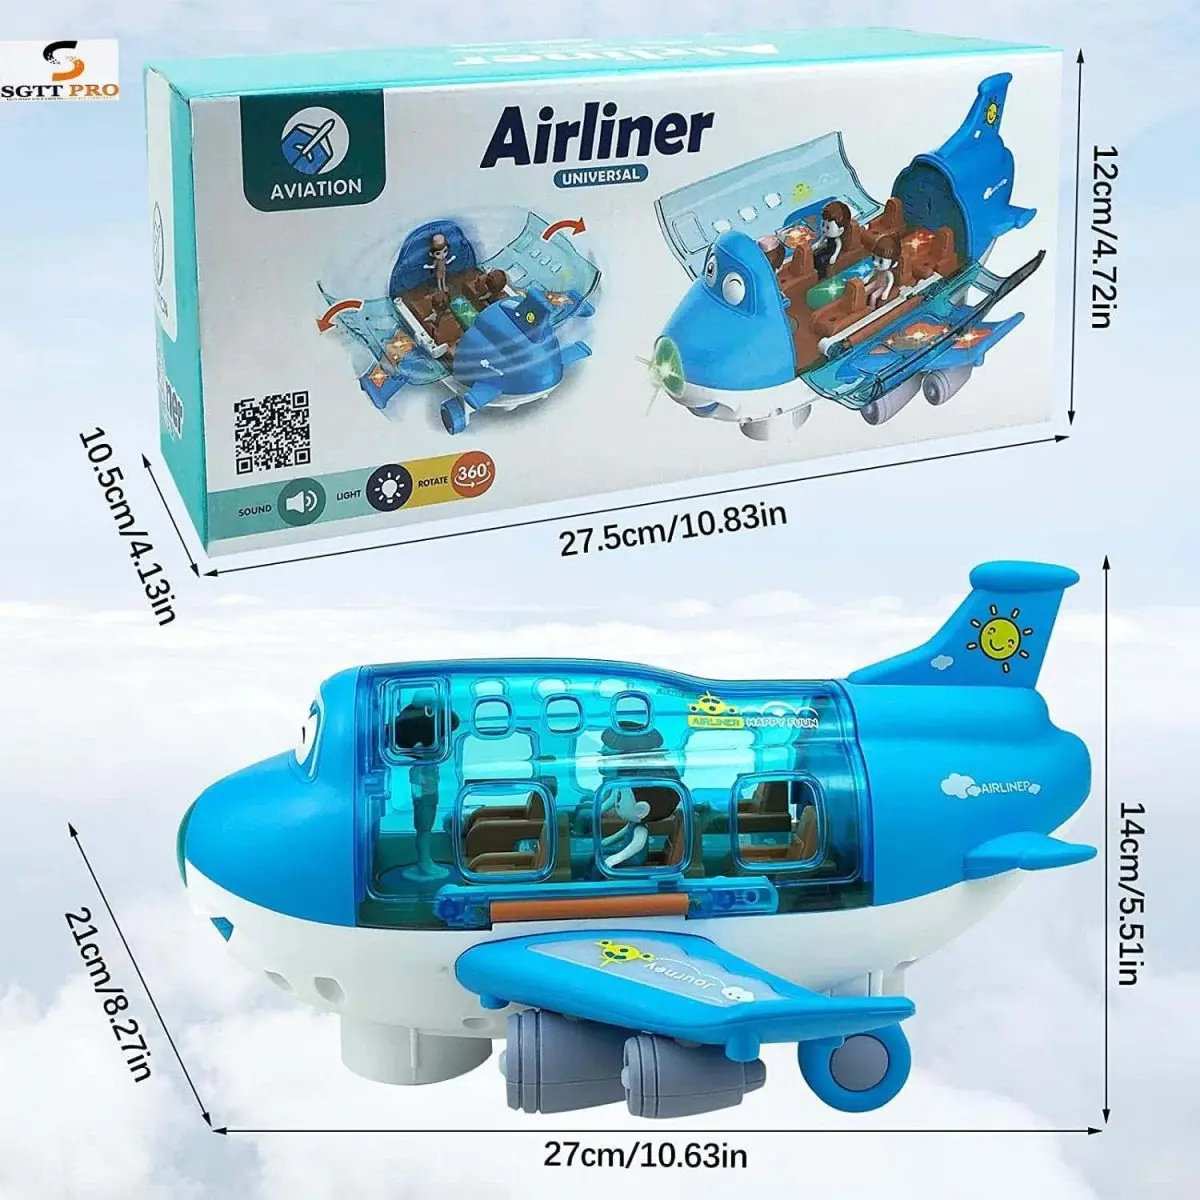 SGTT Toys for Toddlers, Electric Toy Airliner Plane Rotating Airplane Vehicles with Light and Music Airline Toy Vehicle Gift for Kids Boys Girls 3 4 5 6 Year Old and Up, Blue